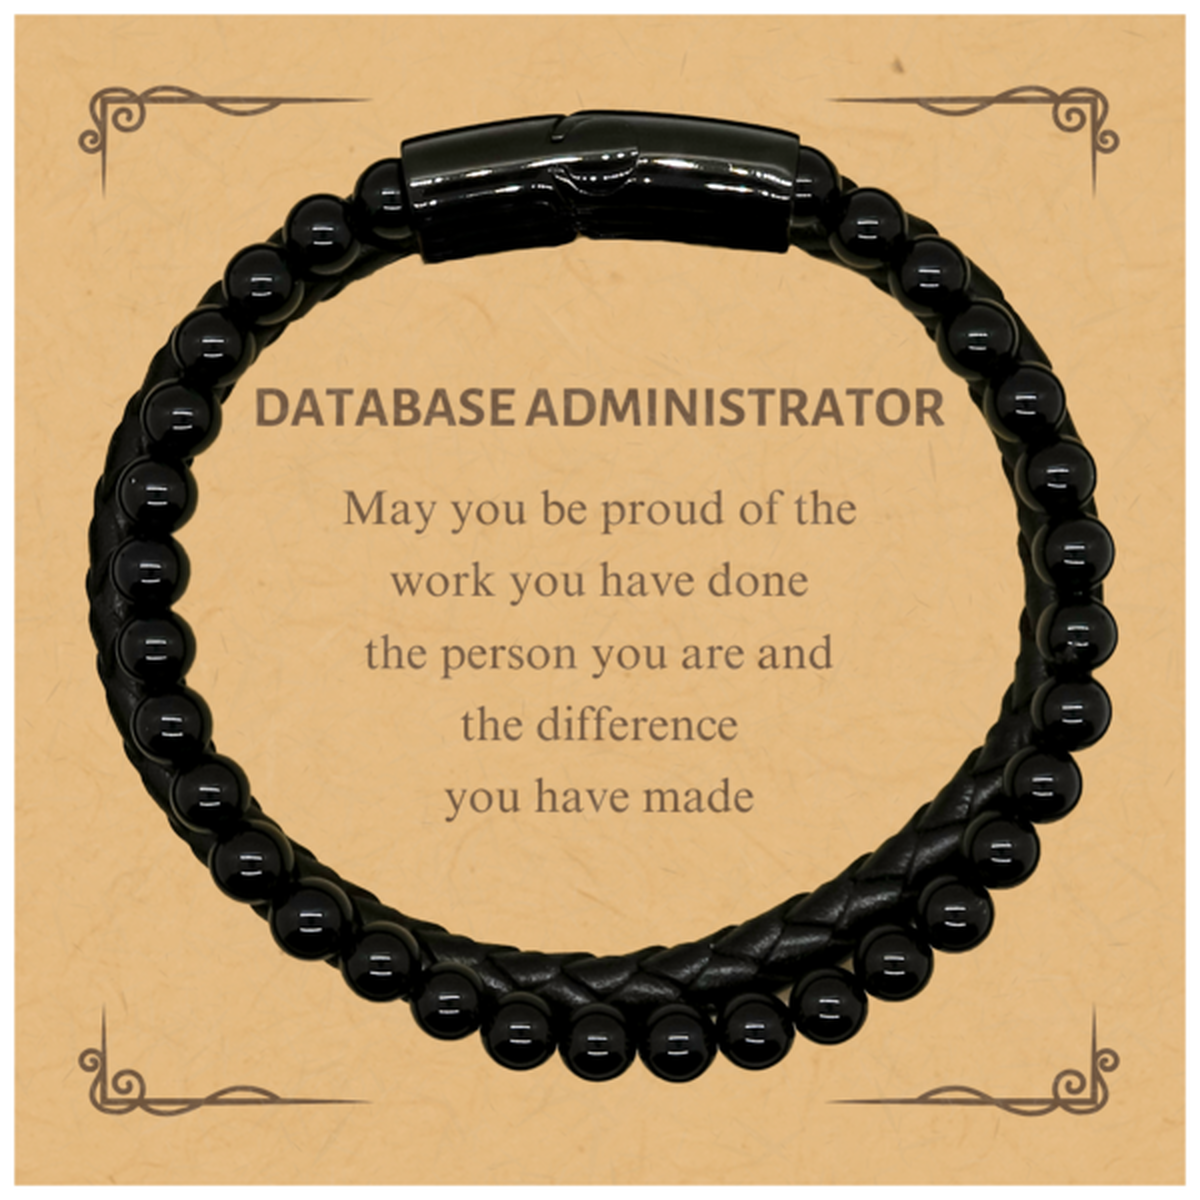 Database Administrator May you be proud of the work you have done, Retirement Database Administrator Stone Leather Bracelets for Colleague Appreciation Gifts Amazing for Database Administrator